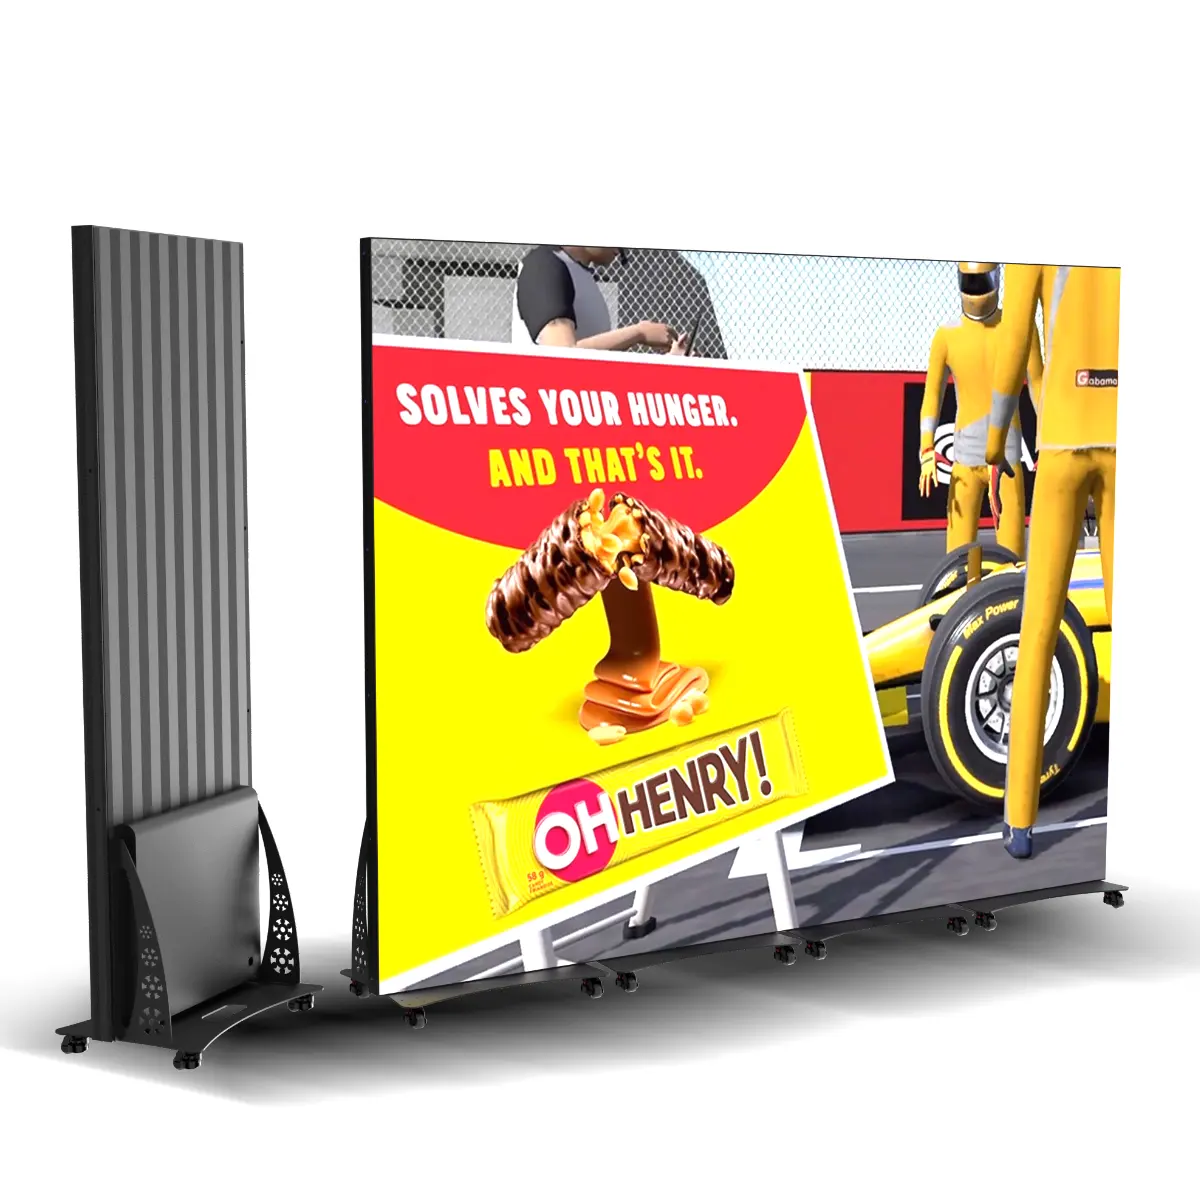 Indoor Advertising Led Poster screen P1.75 P2.19 P2.59 Hd Smart Led Mirror Poster display screen outdoor led screen